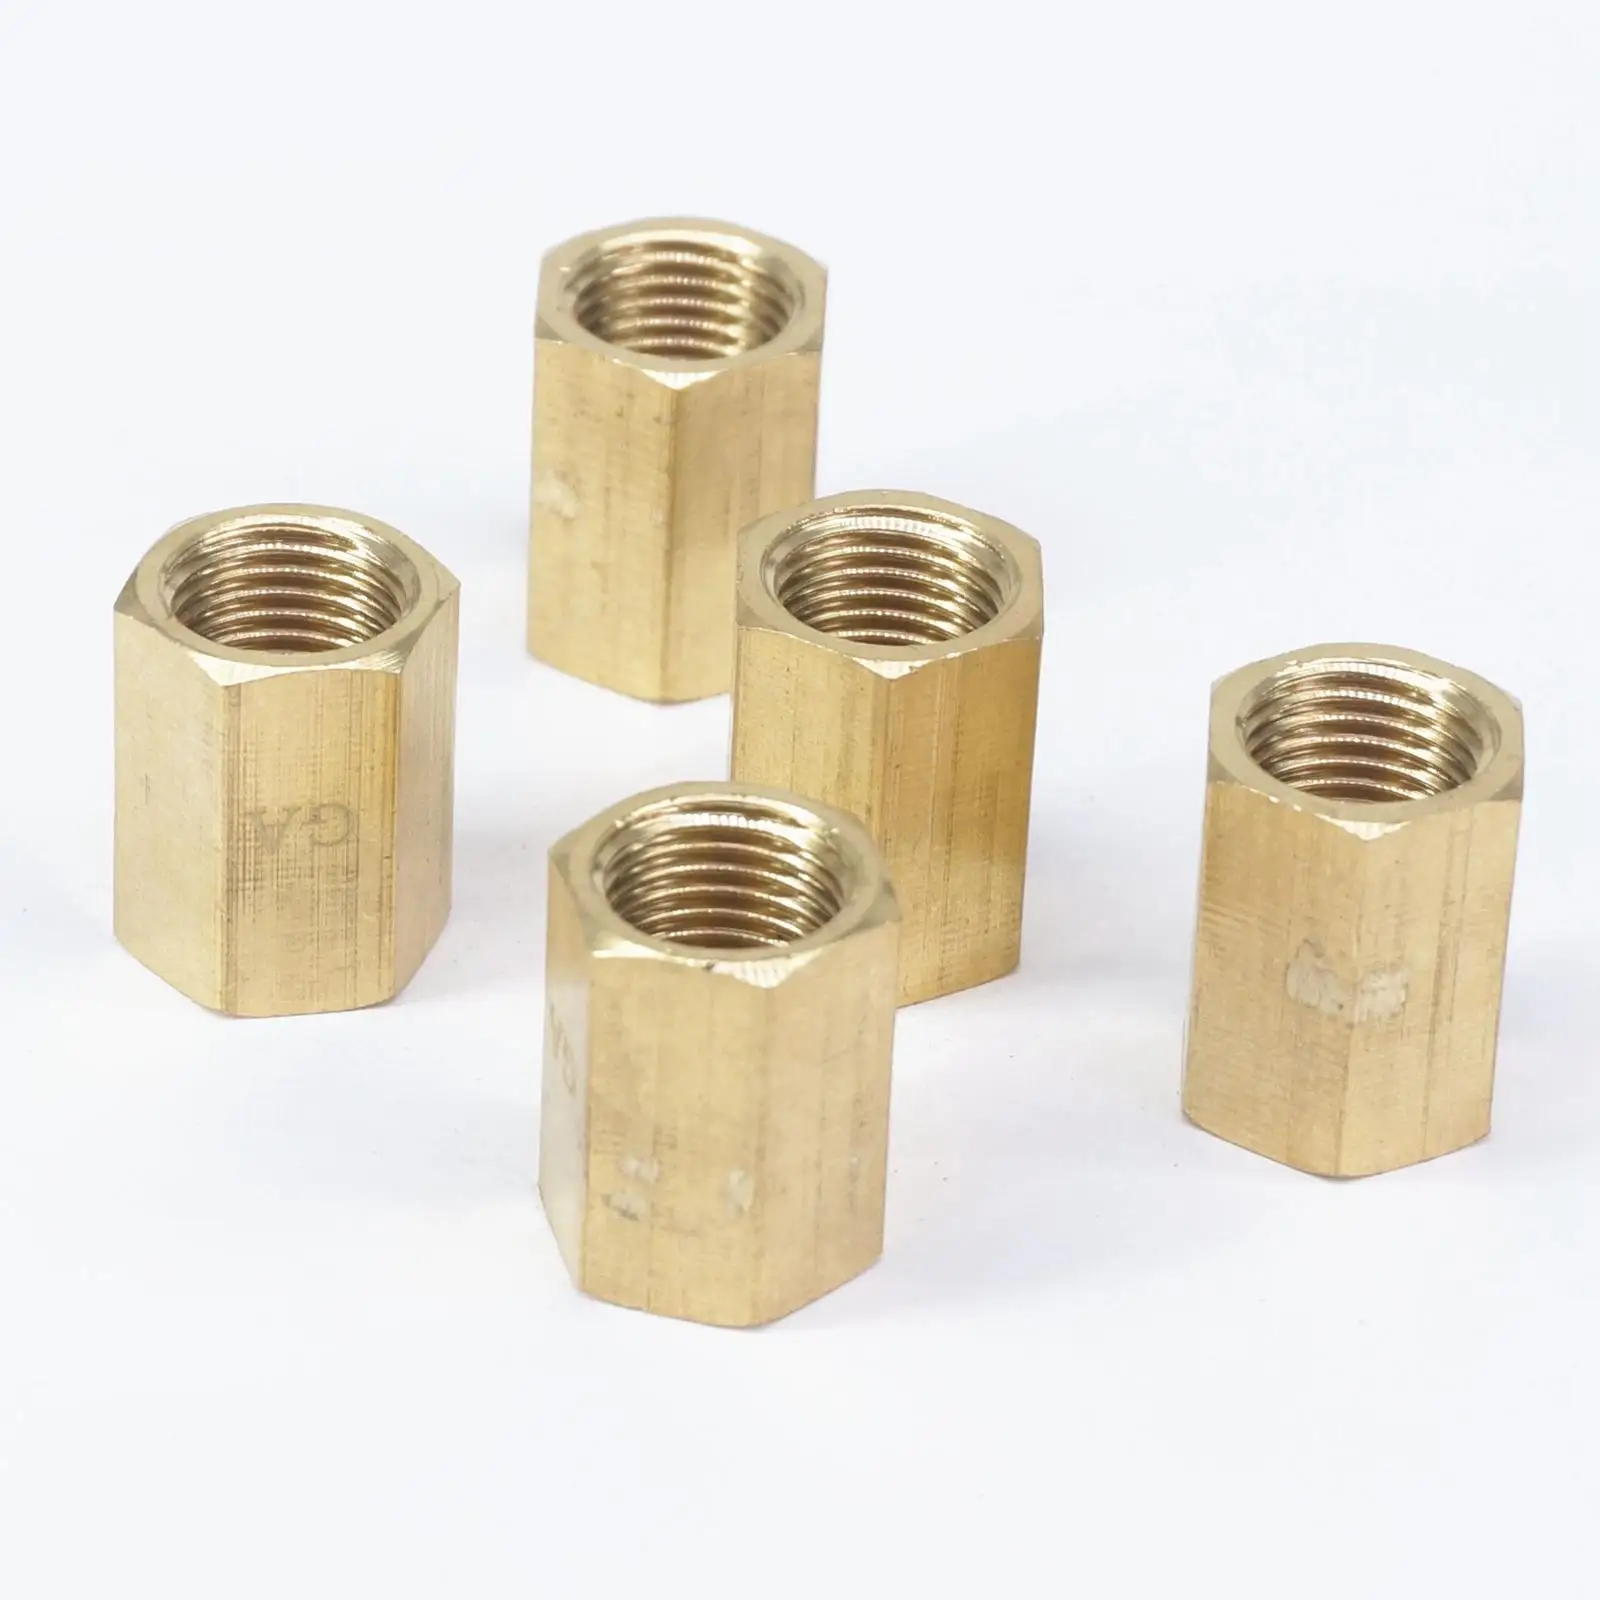 LOT 5 1/4" BSP Female Thread Brass Pipe Fittings Hex Nut Rod Connector Coupling Full port